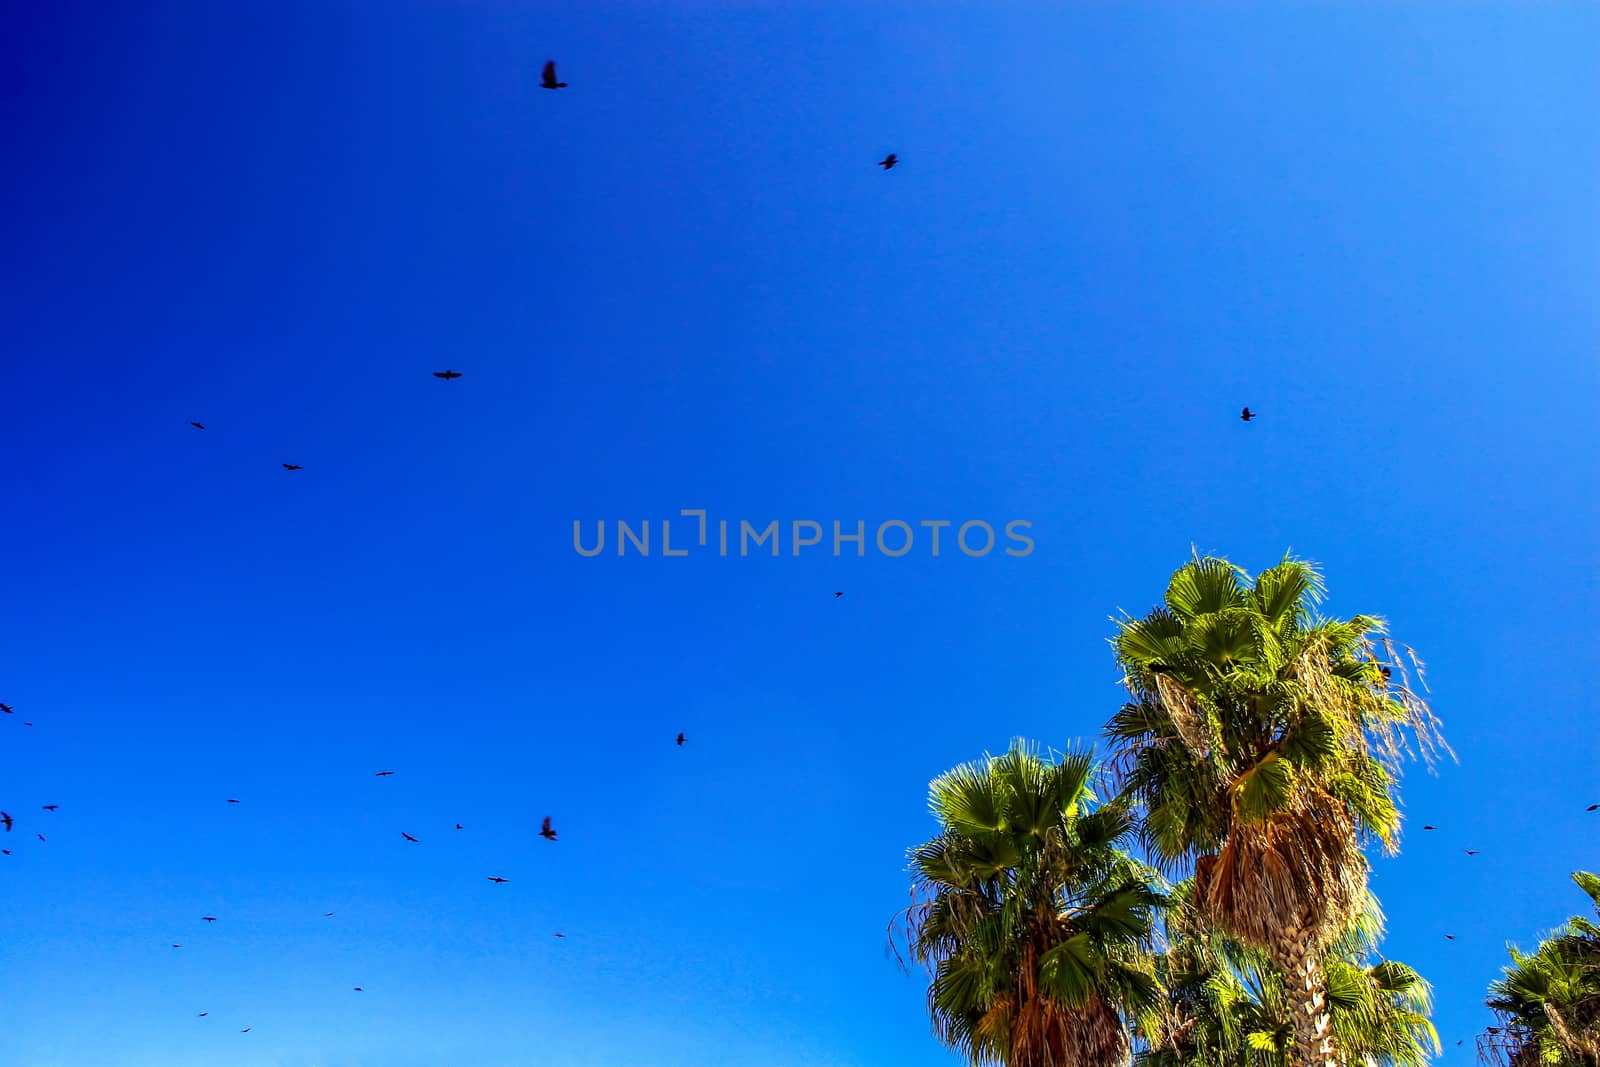 Seagulls and Palm Trees by quackersnaps